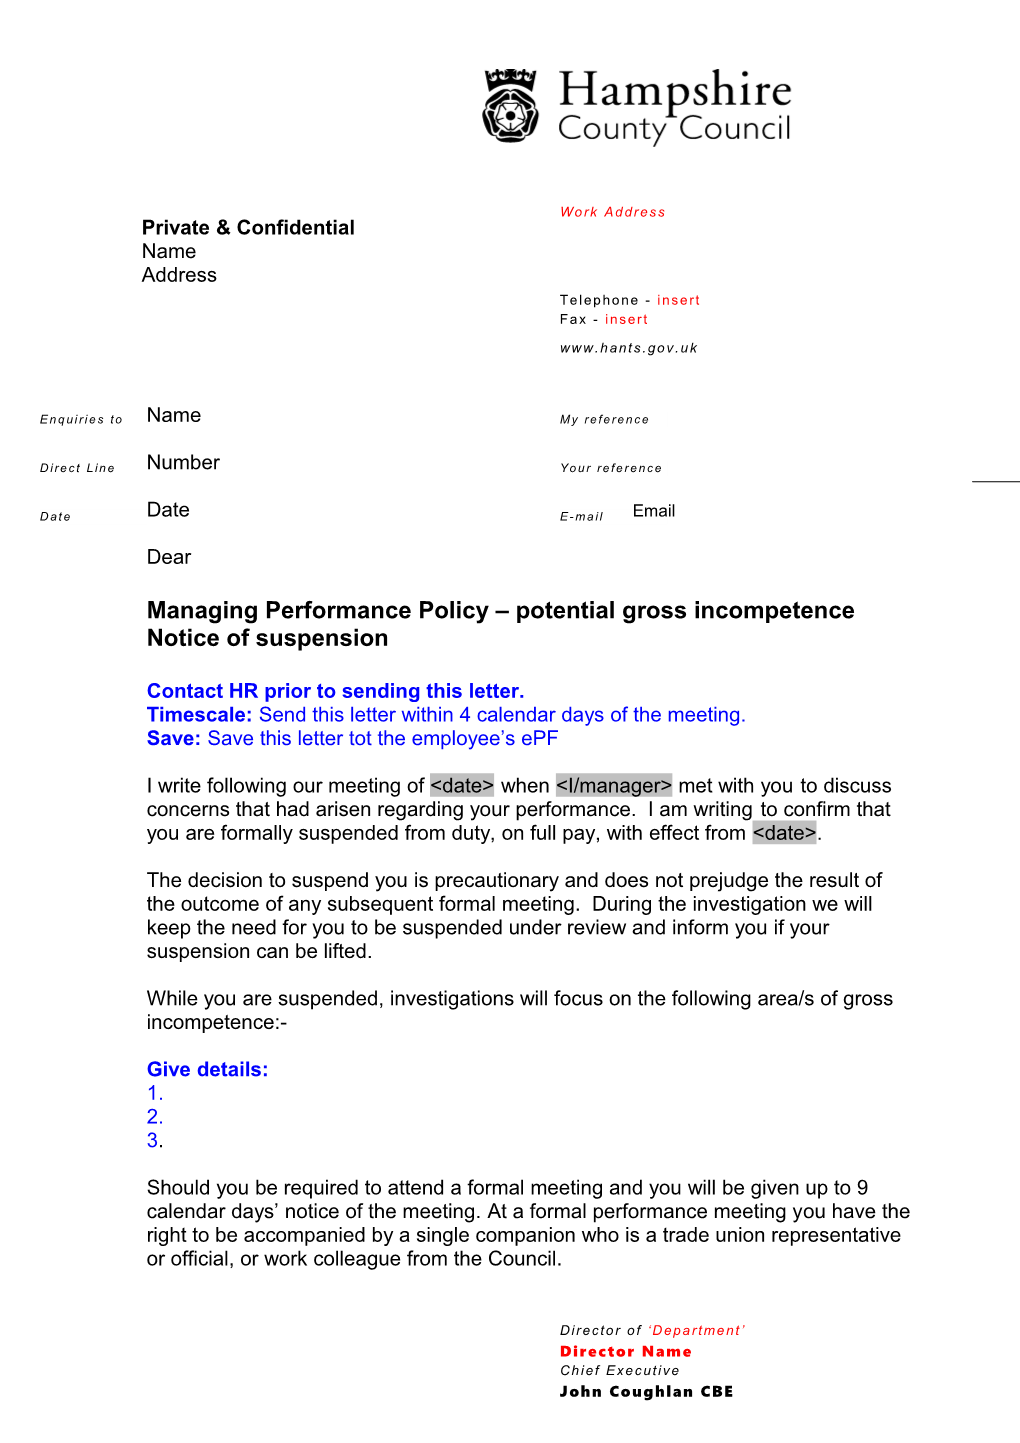 Managing Performance Policy Potential Gross Incompetence Notice of Suspension